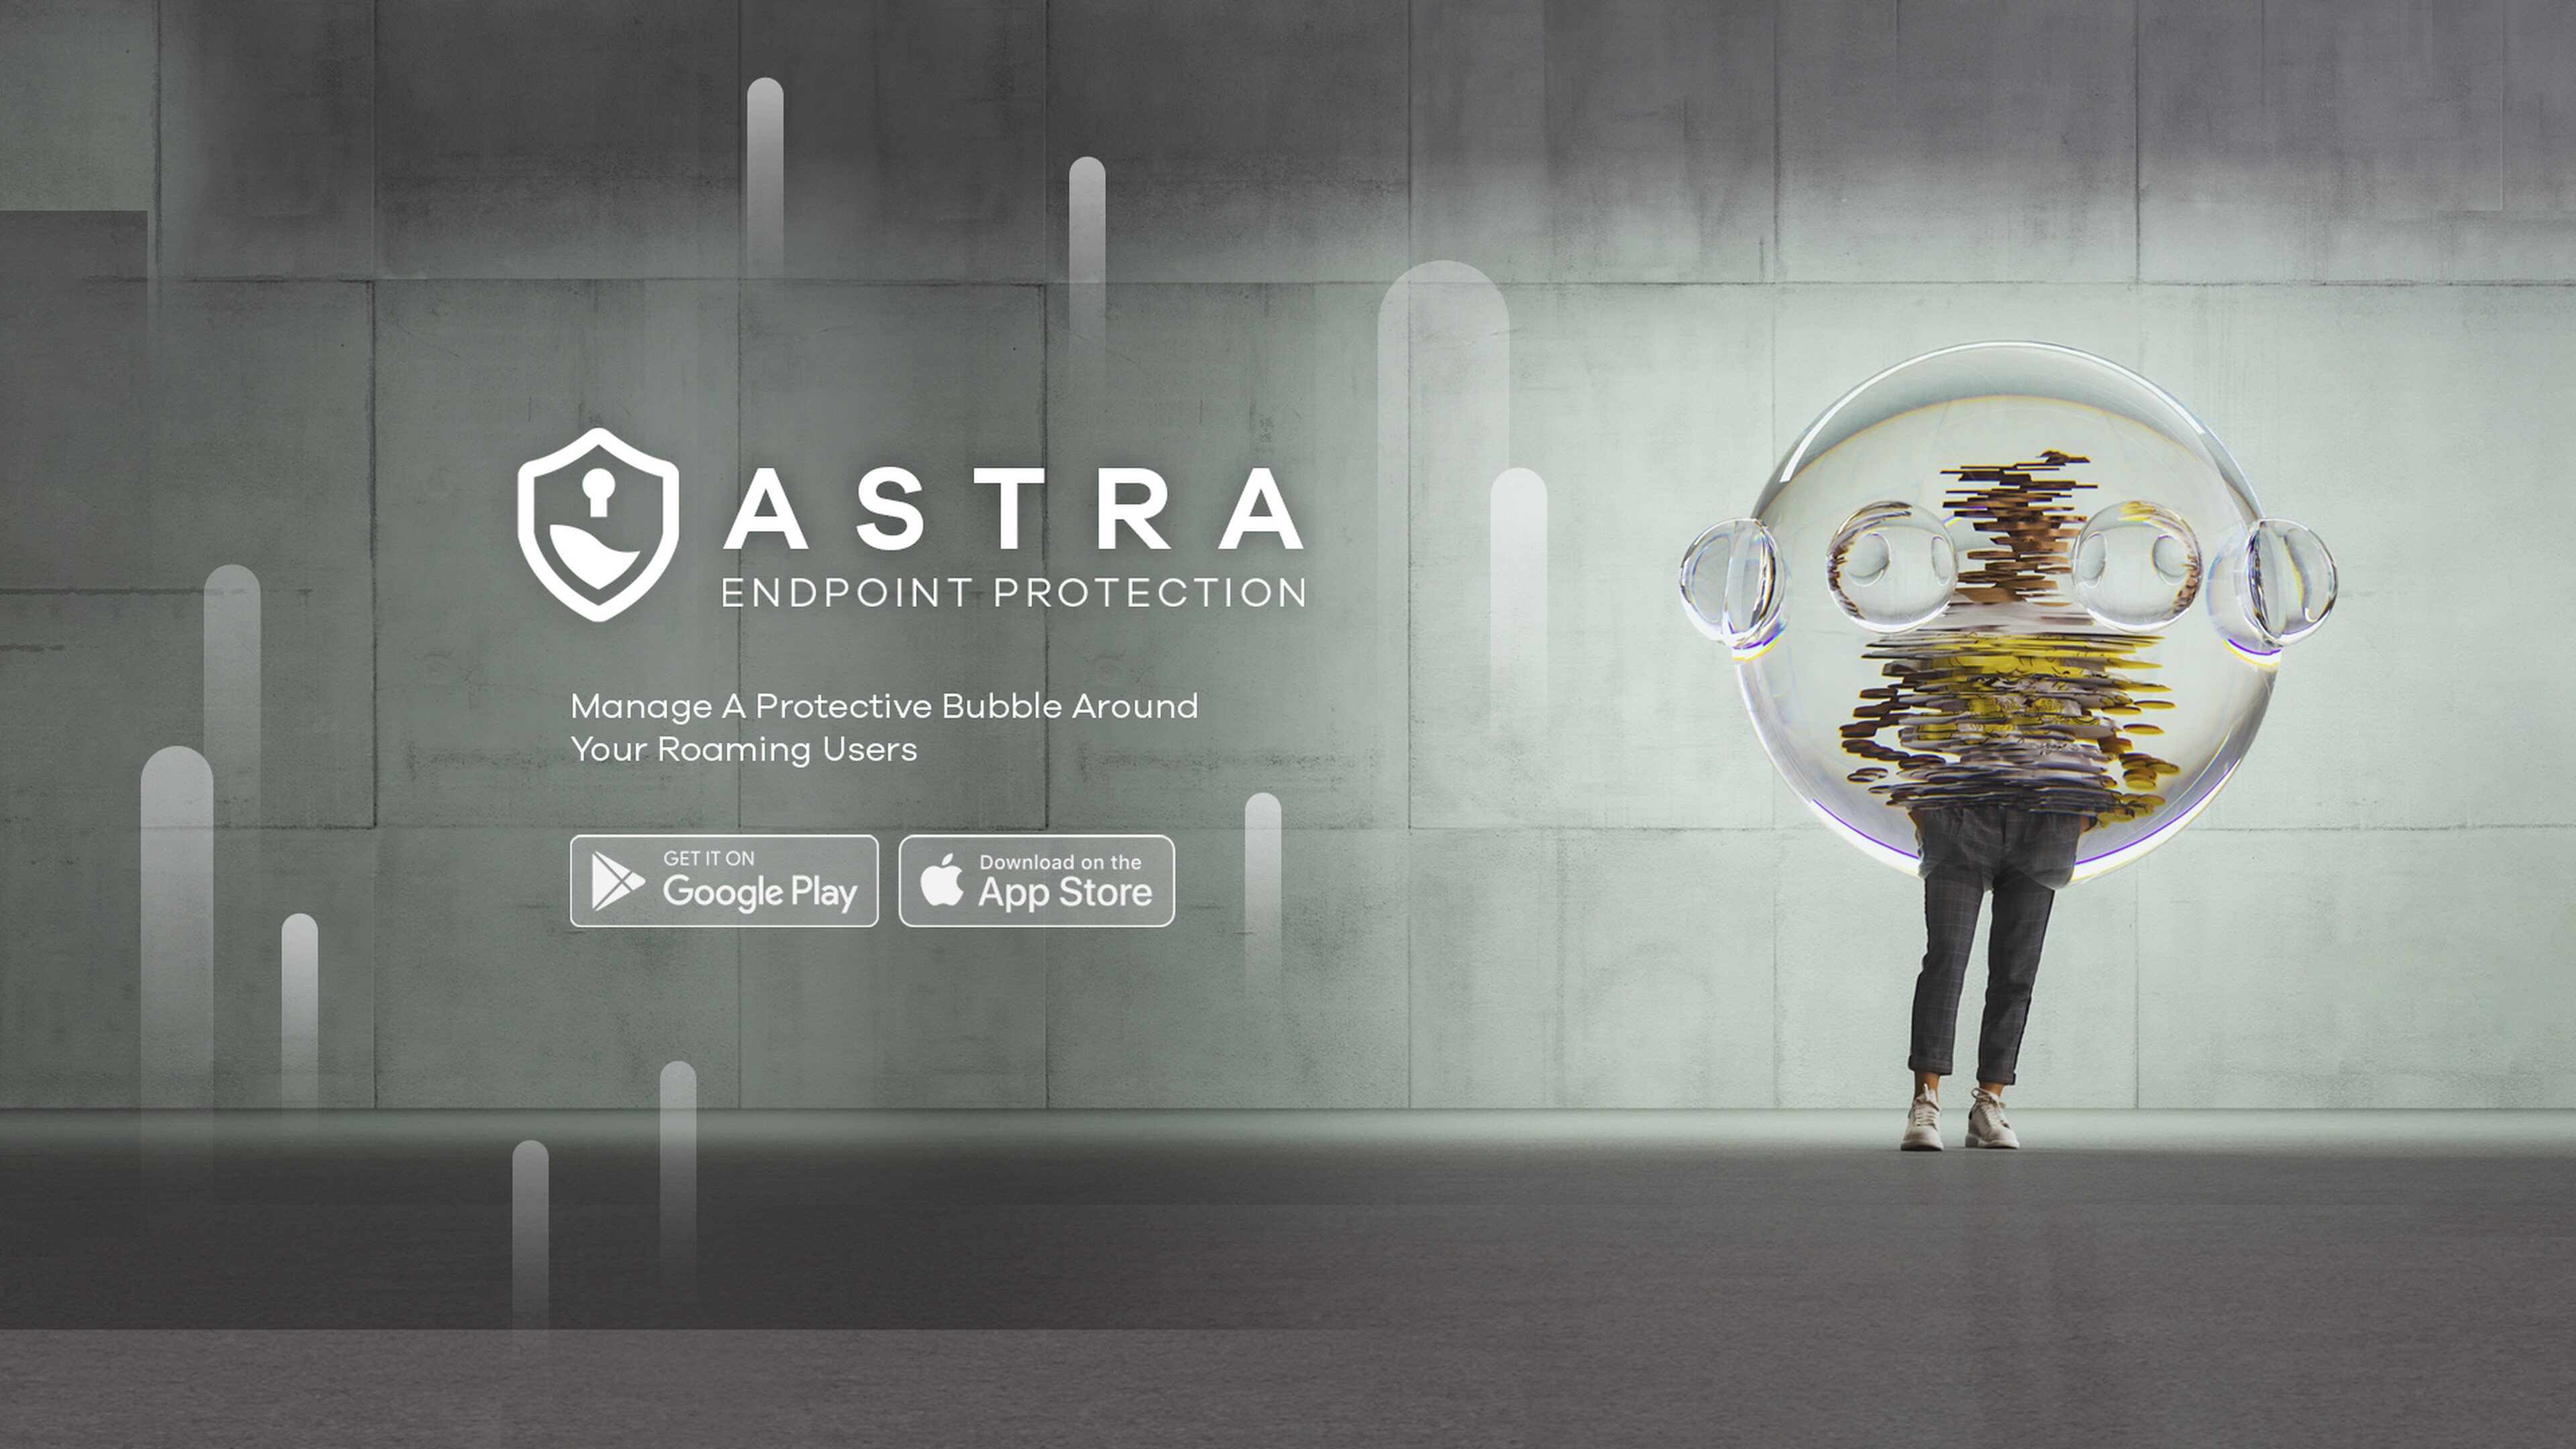 Astra Endpoint